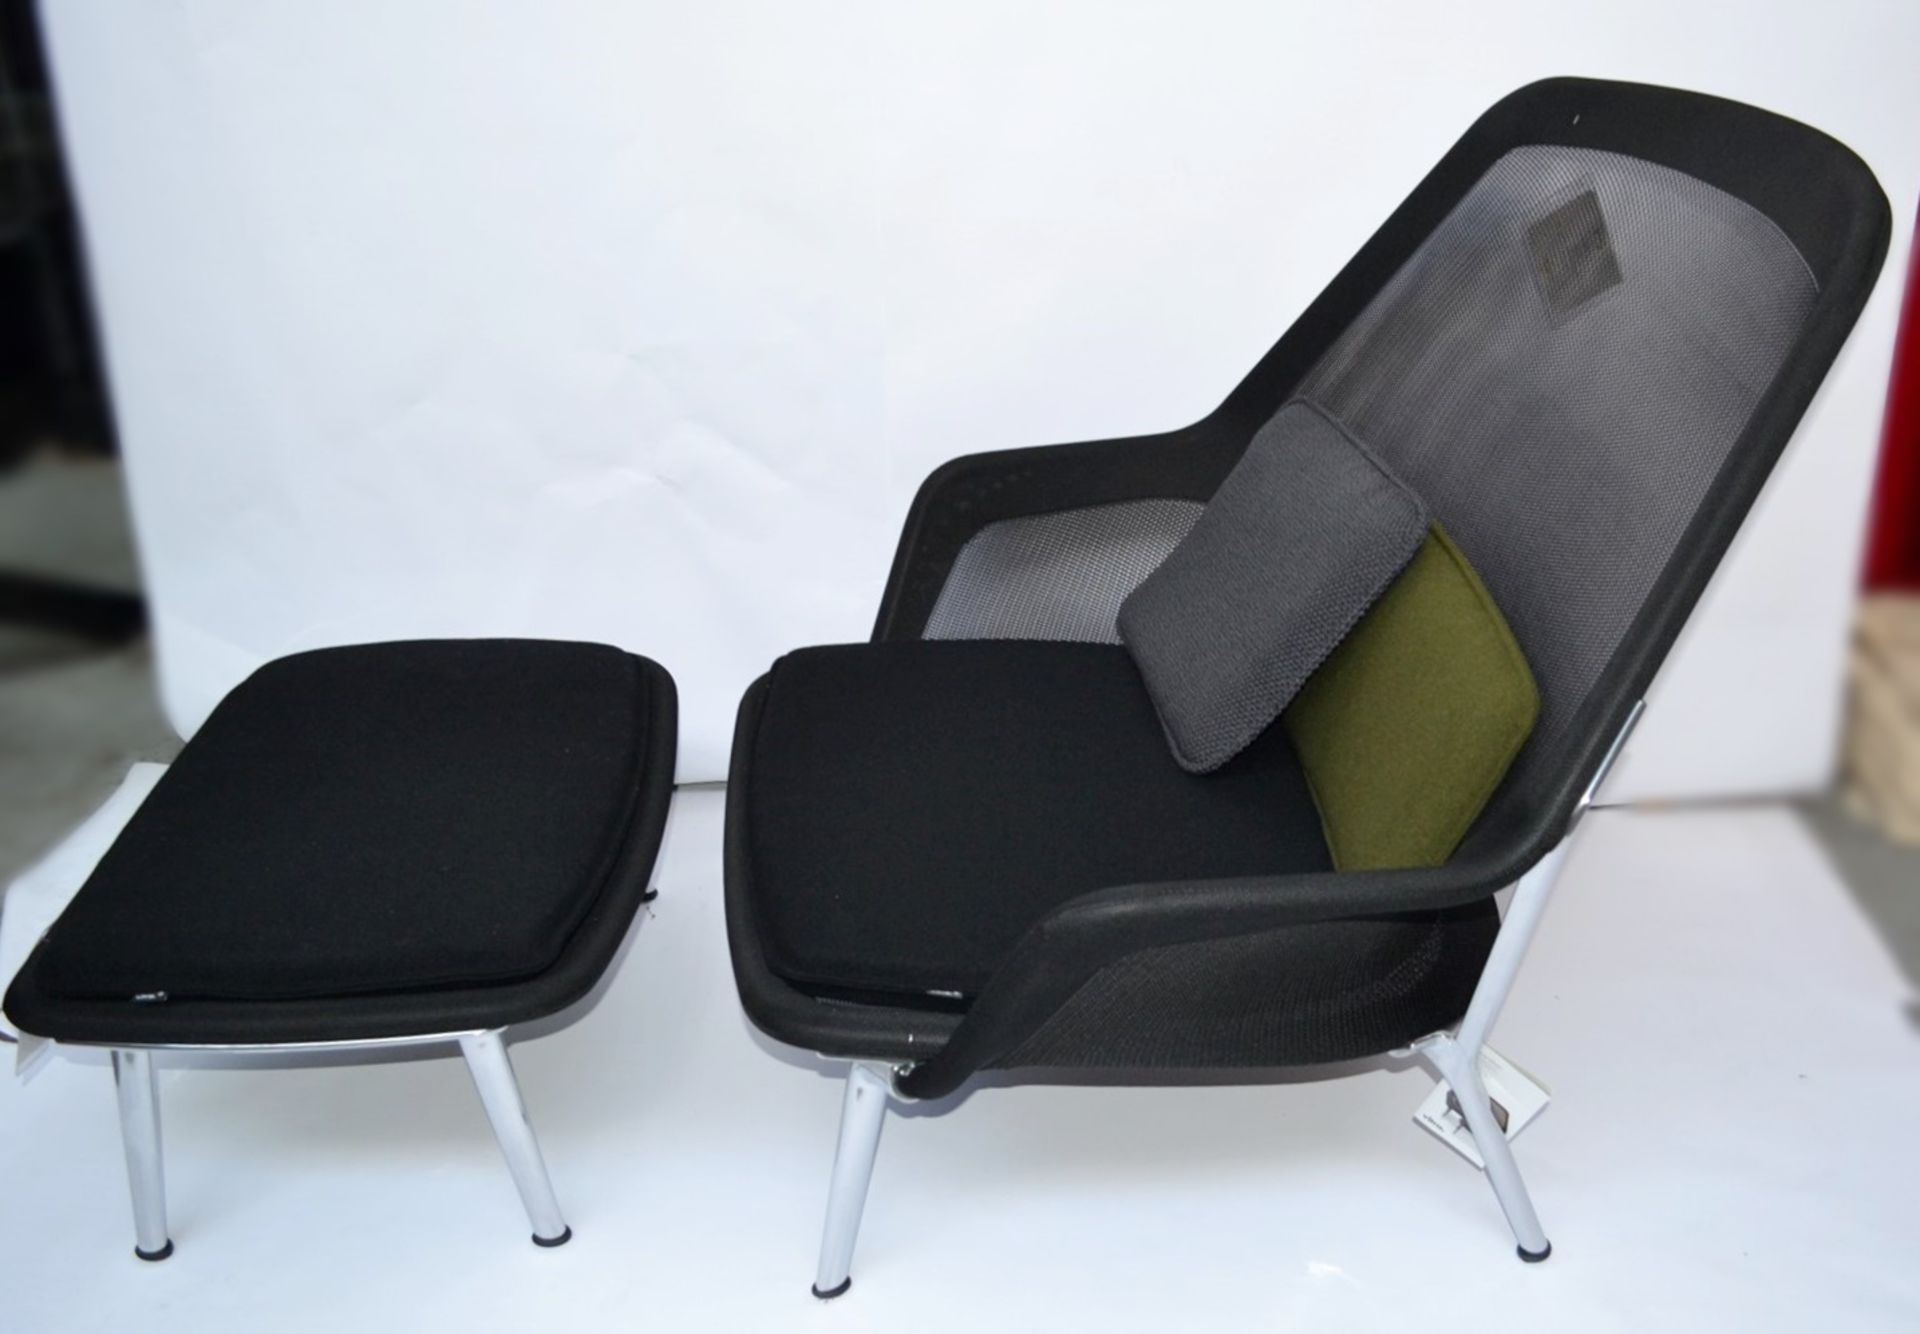 1 x VITRA Slow Chair & Ottoman With Cushions - Colour: Black & Chrome - Ref: 4708962 - CL087 - - Image 4 of 6